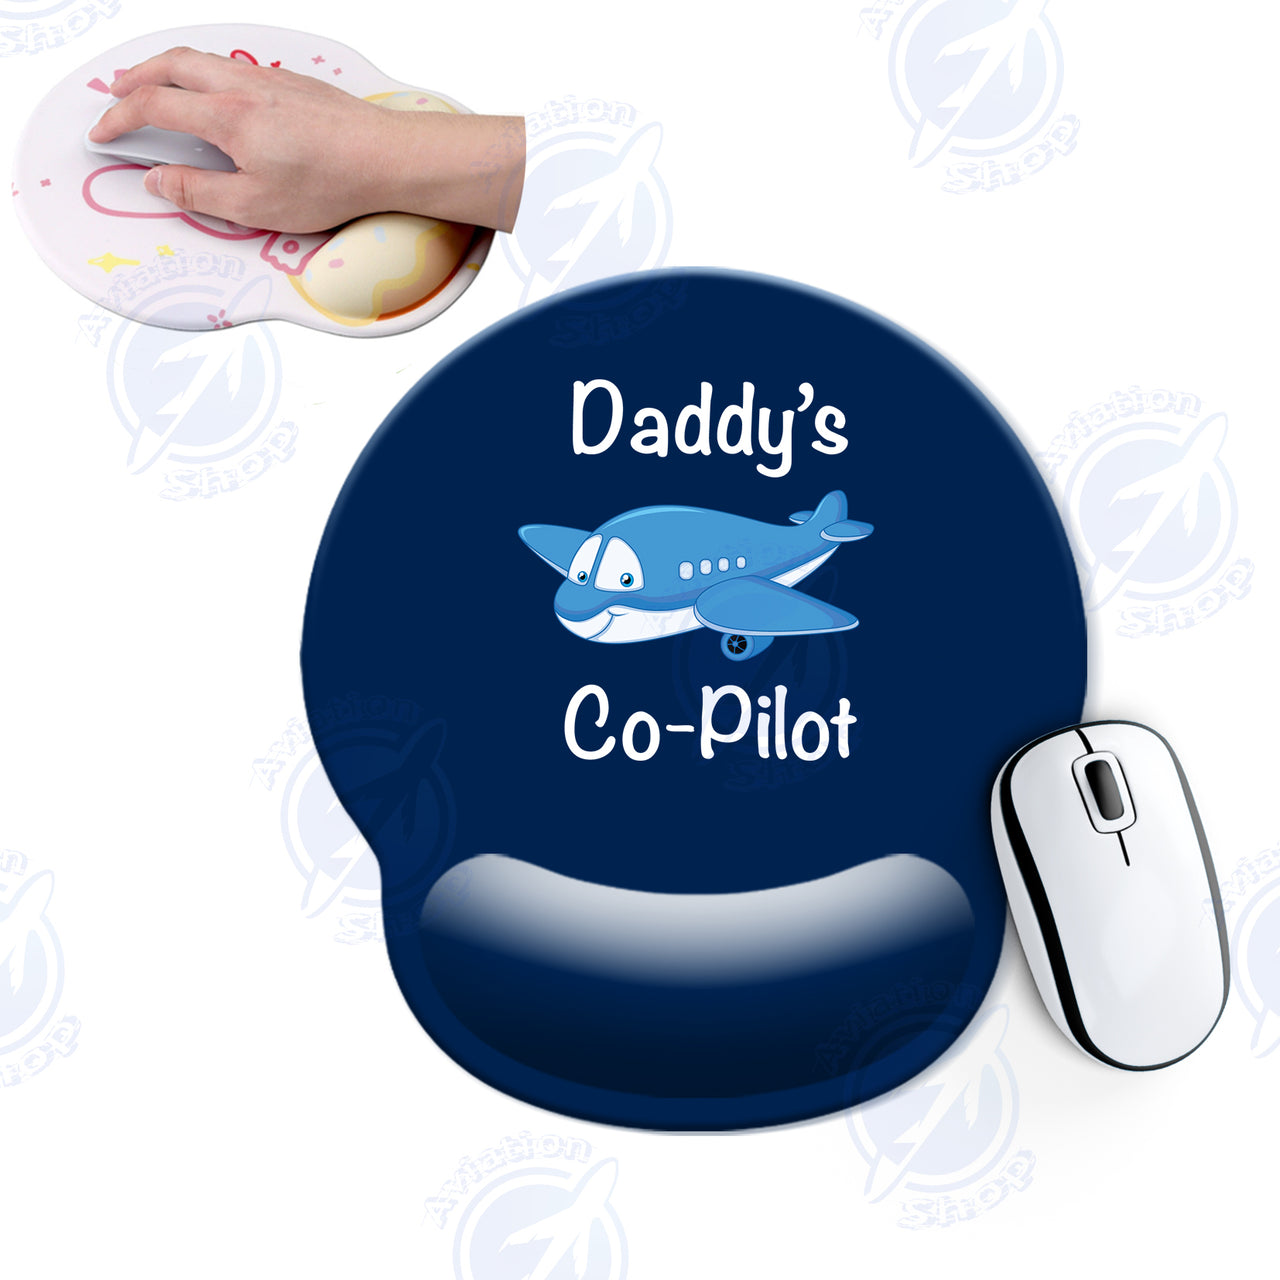 Daddy's Co-Pilot (Jet Airplane) Designed Ergonomic Mouse Pads